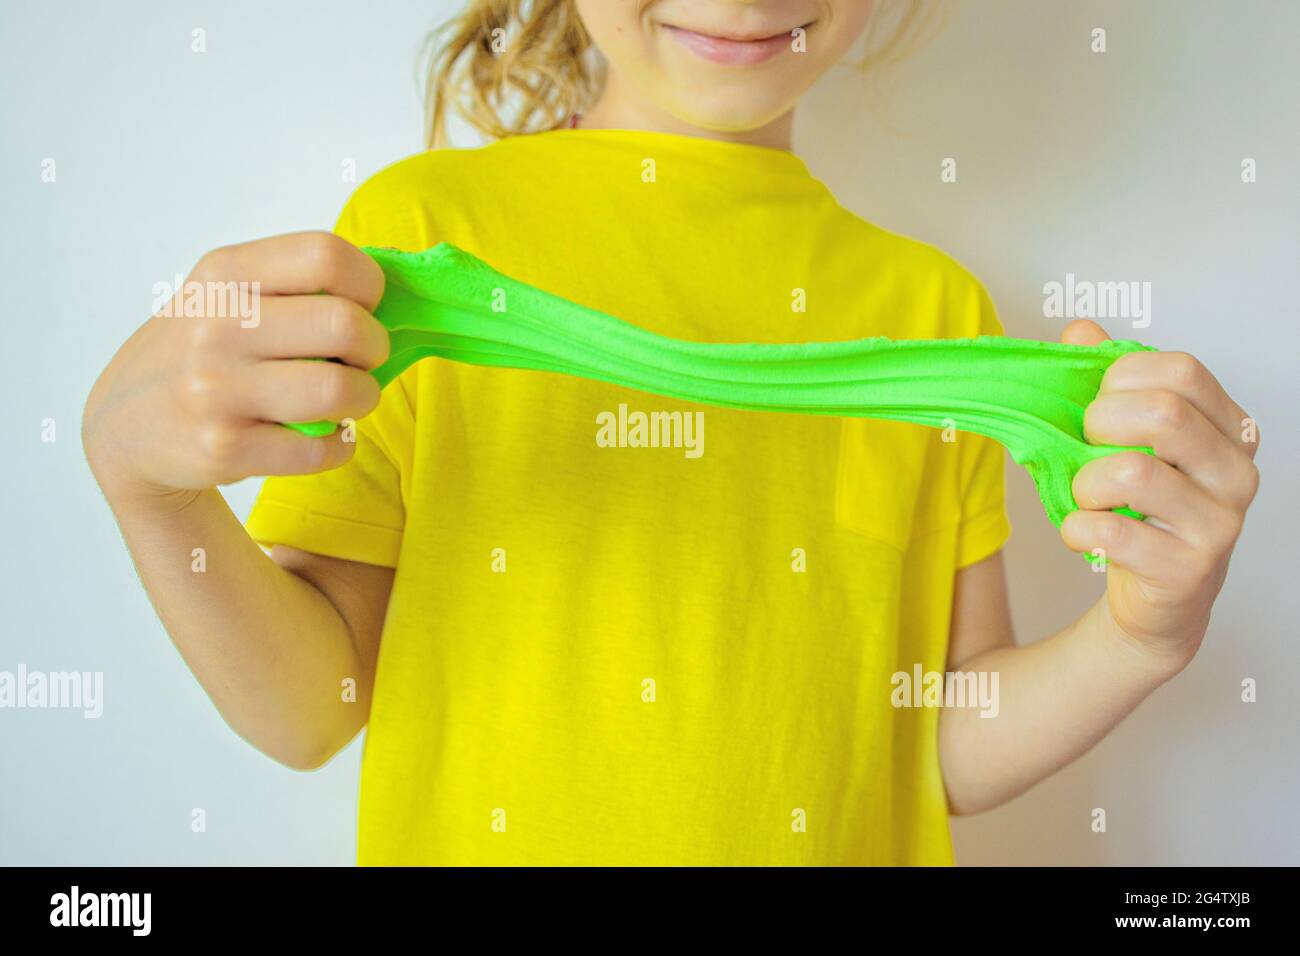 Bottles Of Homemade Plaything Called Slime Colorful Of Science Toy In  Container Spill On Table Selective Focus On Slime Stock Photo - Download  Image Now - iStock